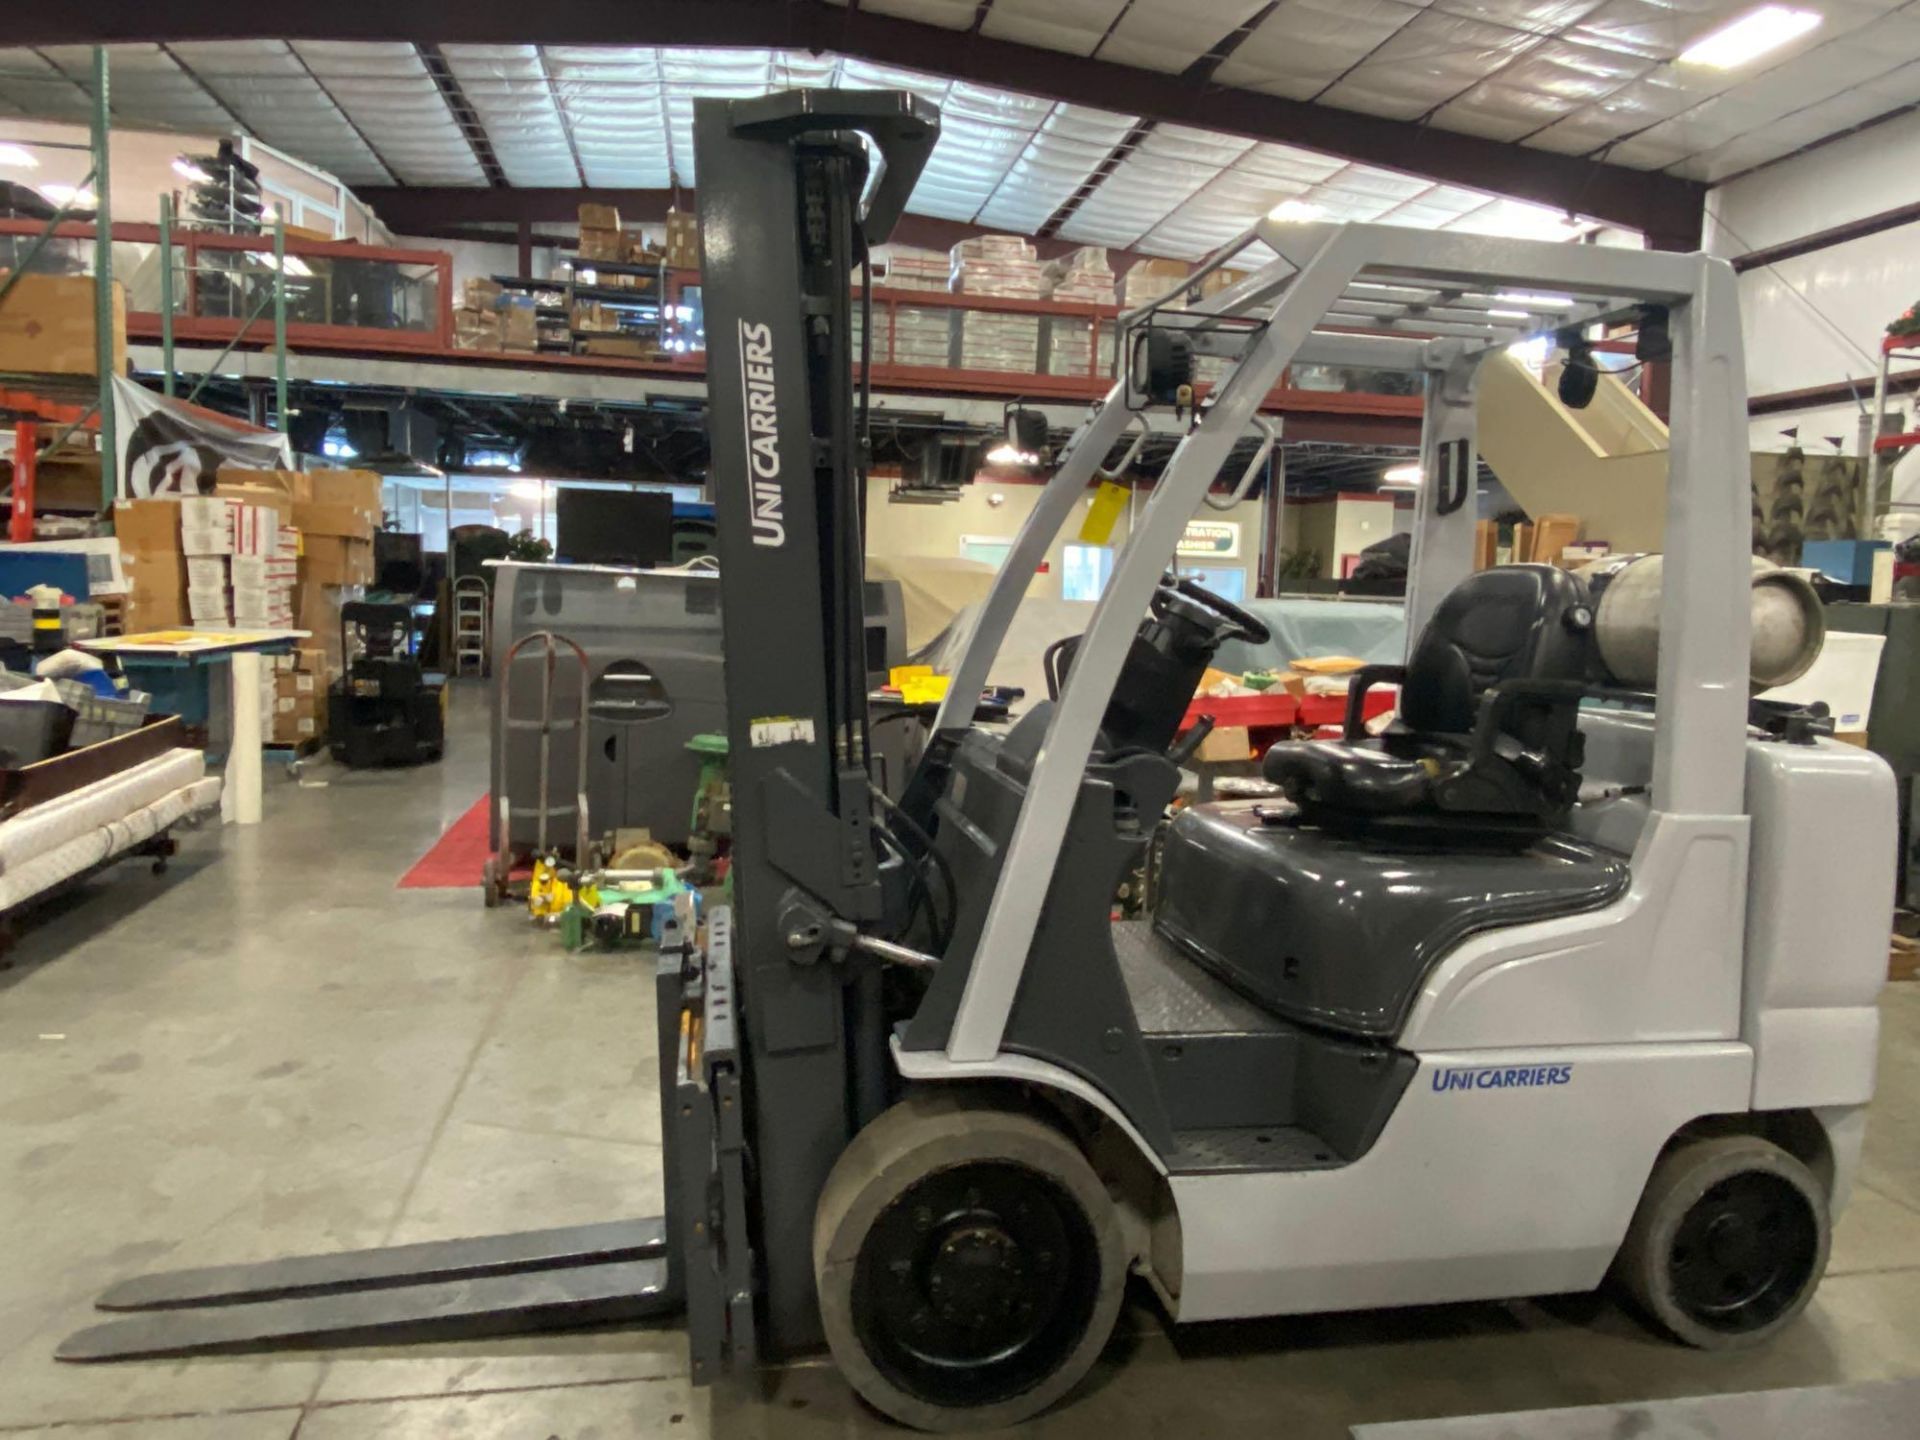 2014 UNICARRIERS LP FORKLIFT MODEL MCUG1F2F30LV, APPROX. 6,000 LB CAPACITY - Image 4 of 10